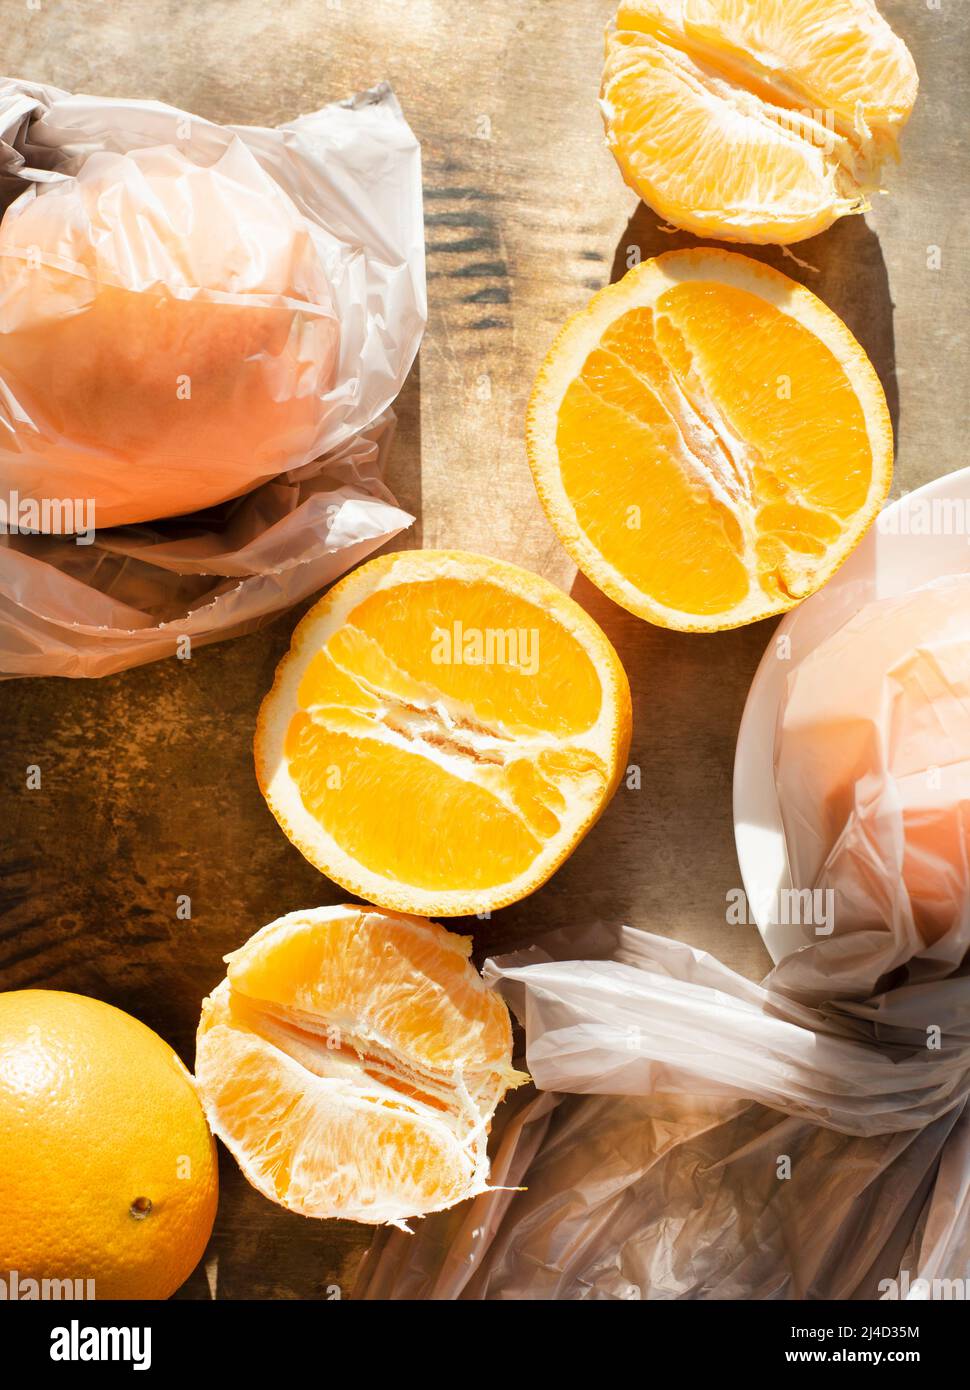 Still life with oranges Stock Photo